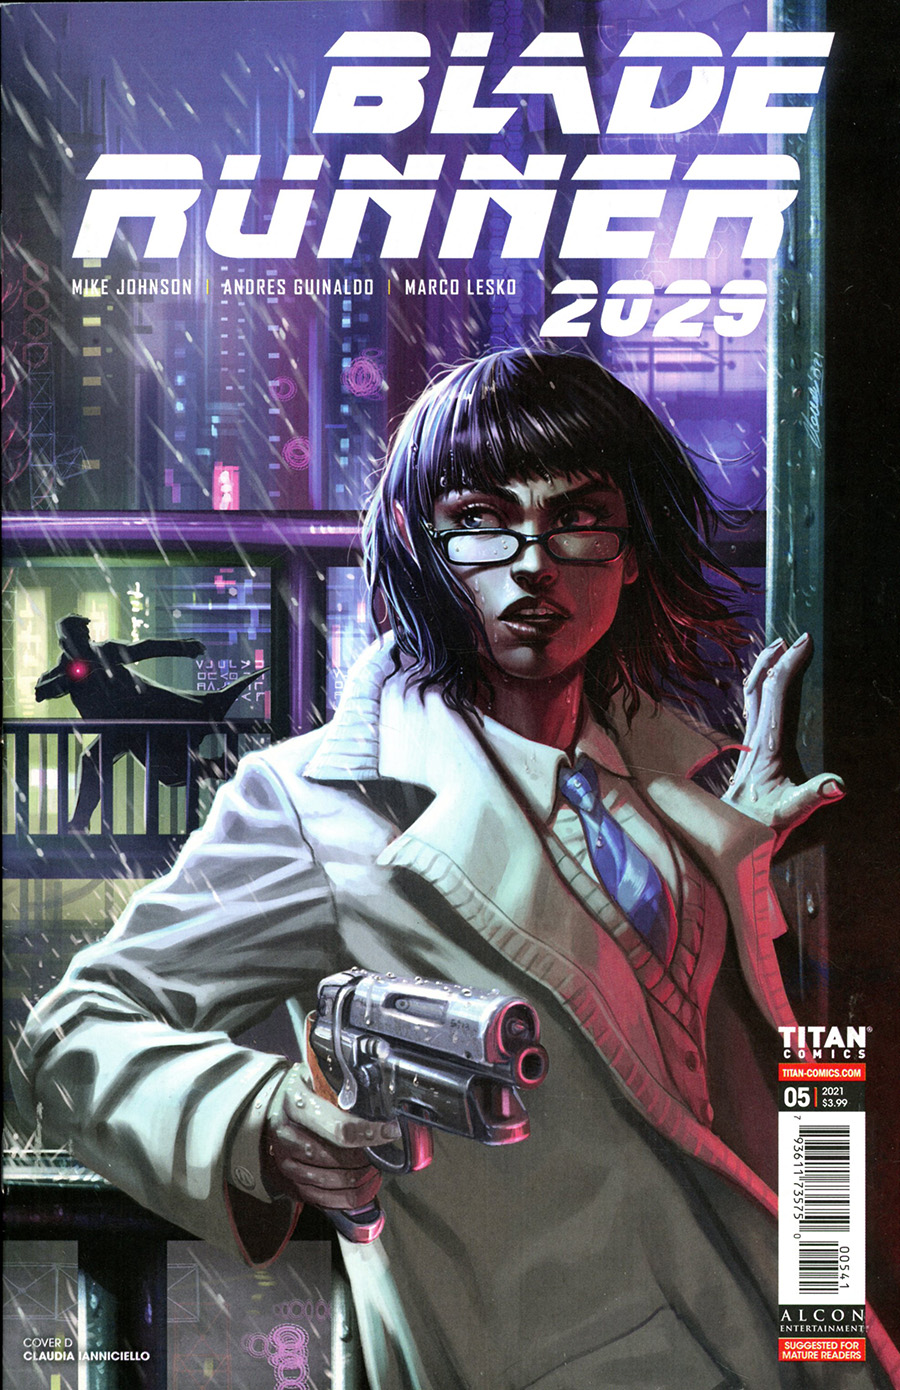 Blade Runner 2029 #5 Cover D Variant Claudia Ianniciello Cover